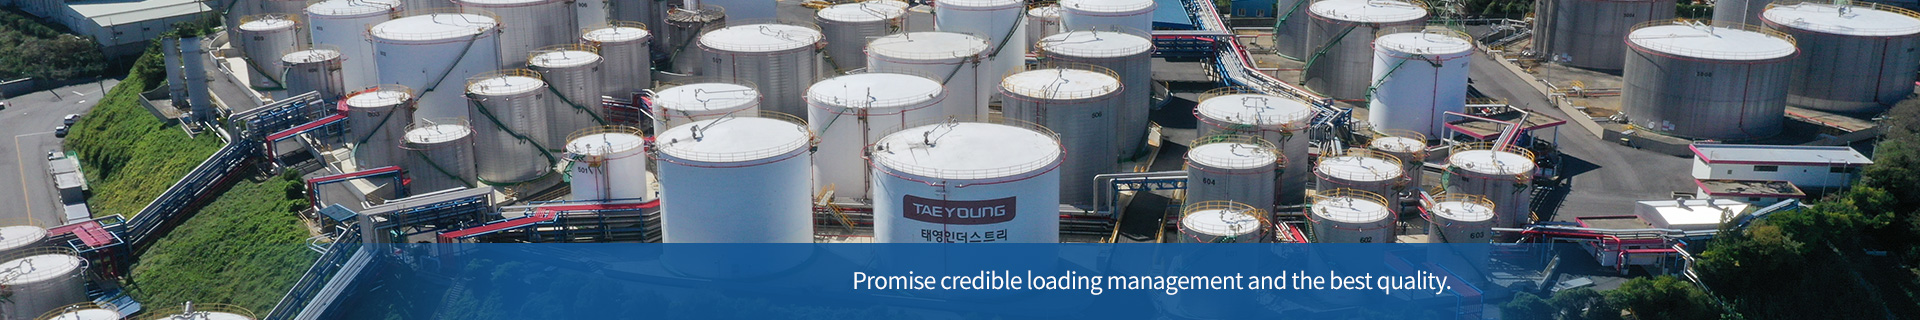 Promise credible loading management and the best quality.